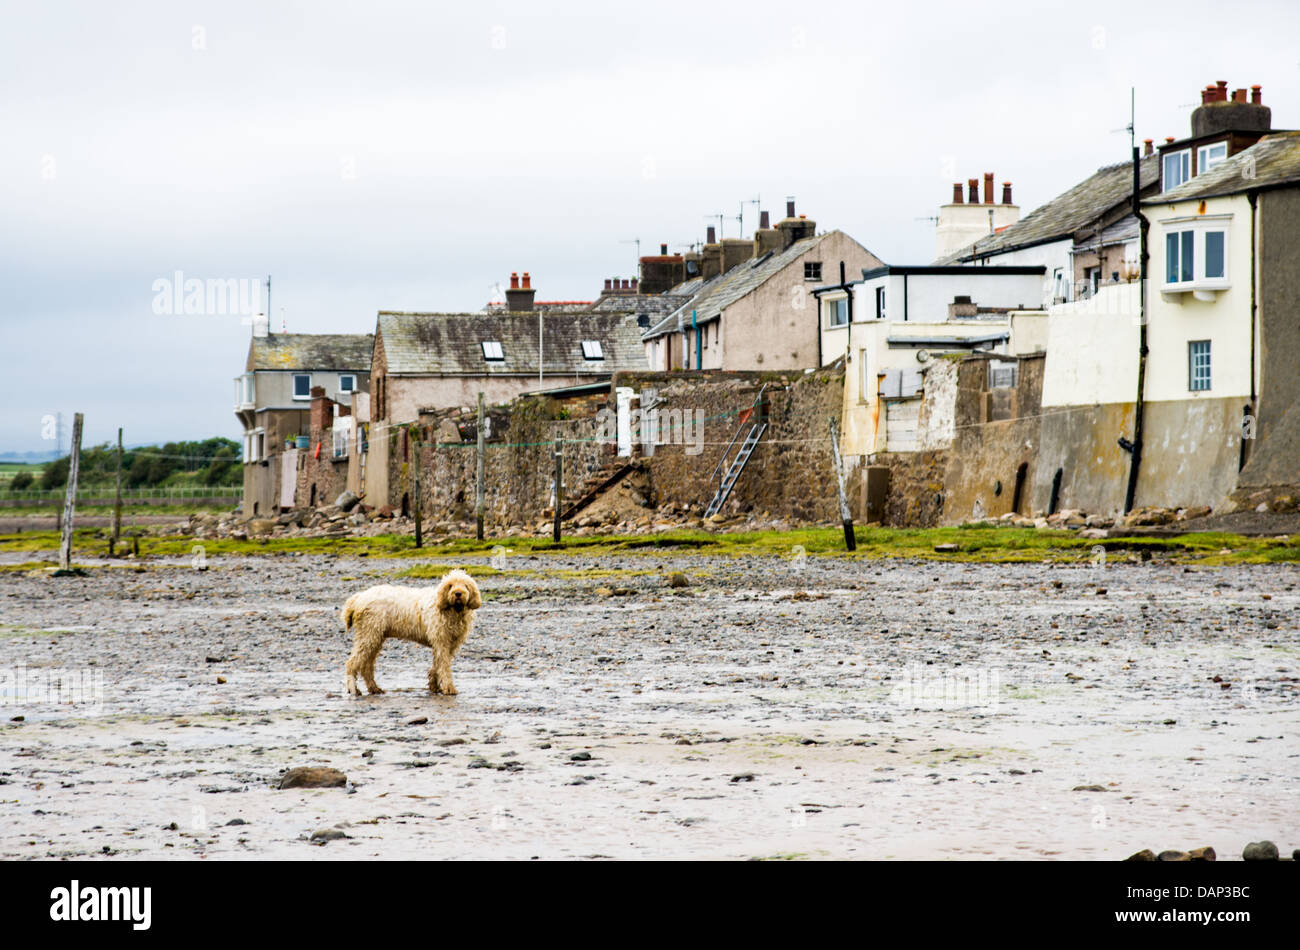 A big shaggy dog walking in the mud of intertidal zone during low tide with a row of seaside houses in the background. Stock Photo